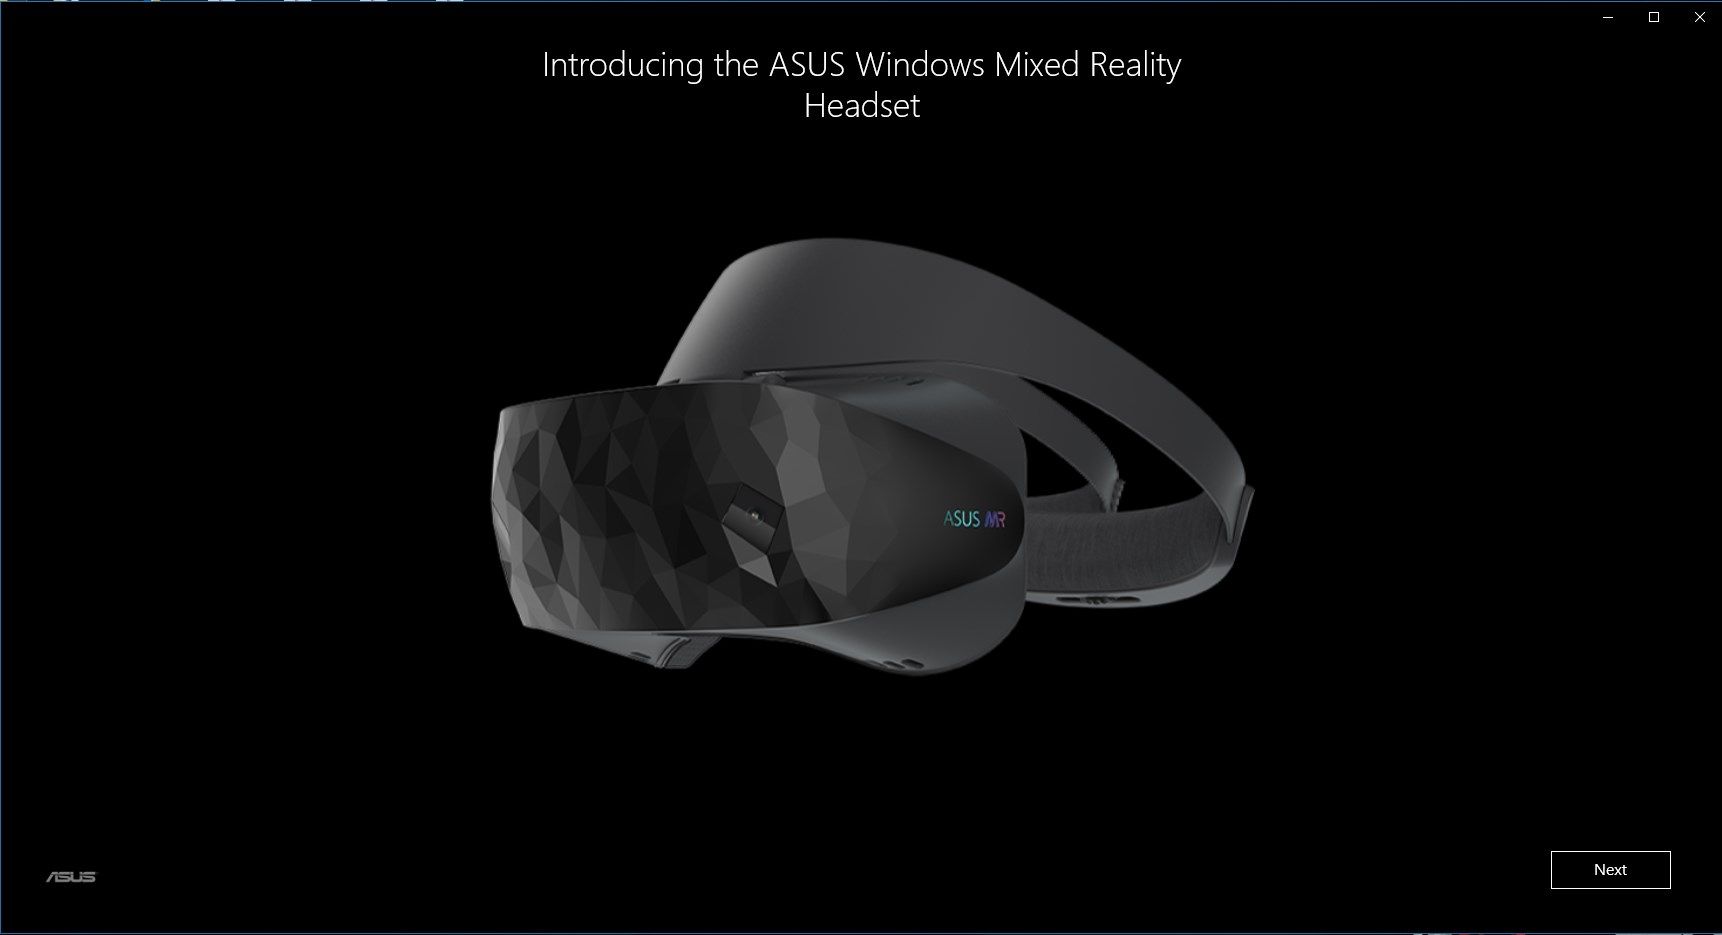 ASUS Windows Mixed Reality Headset